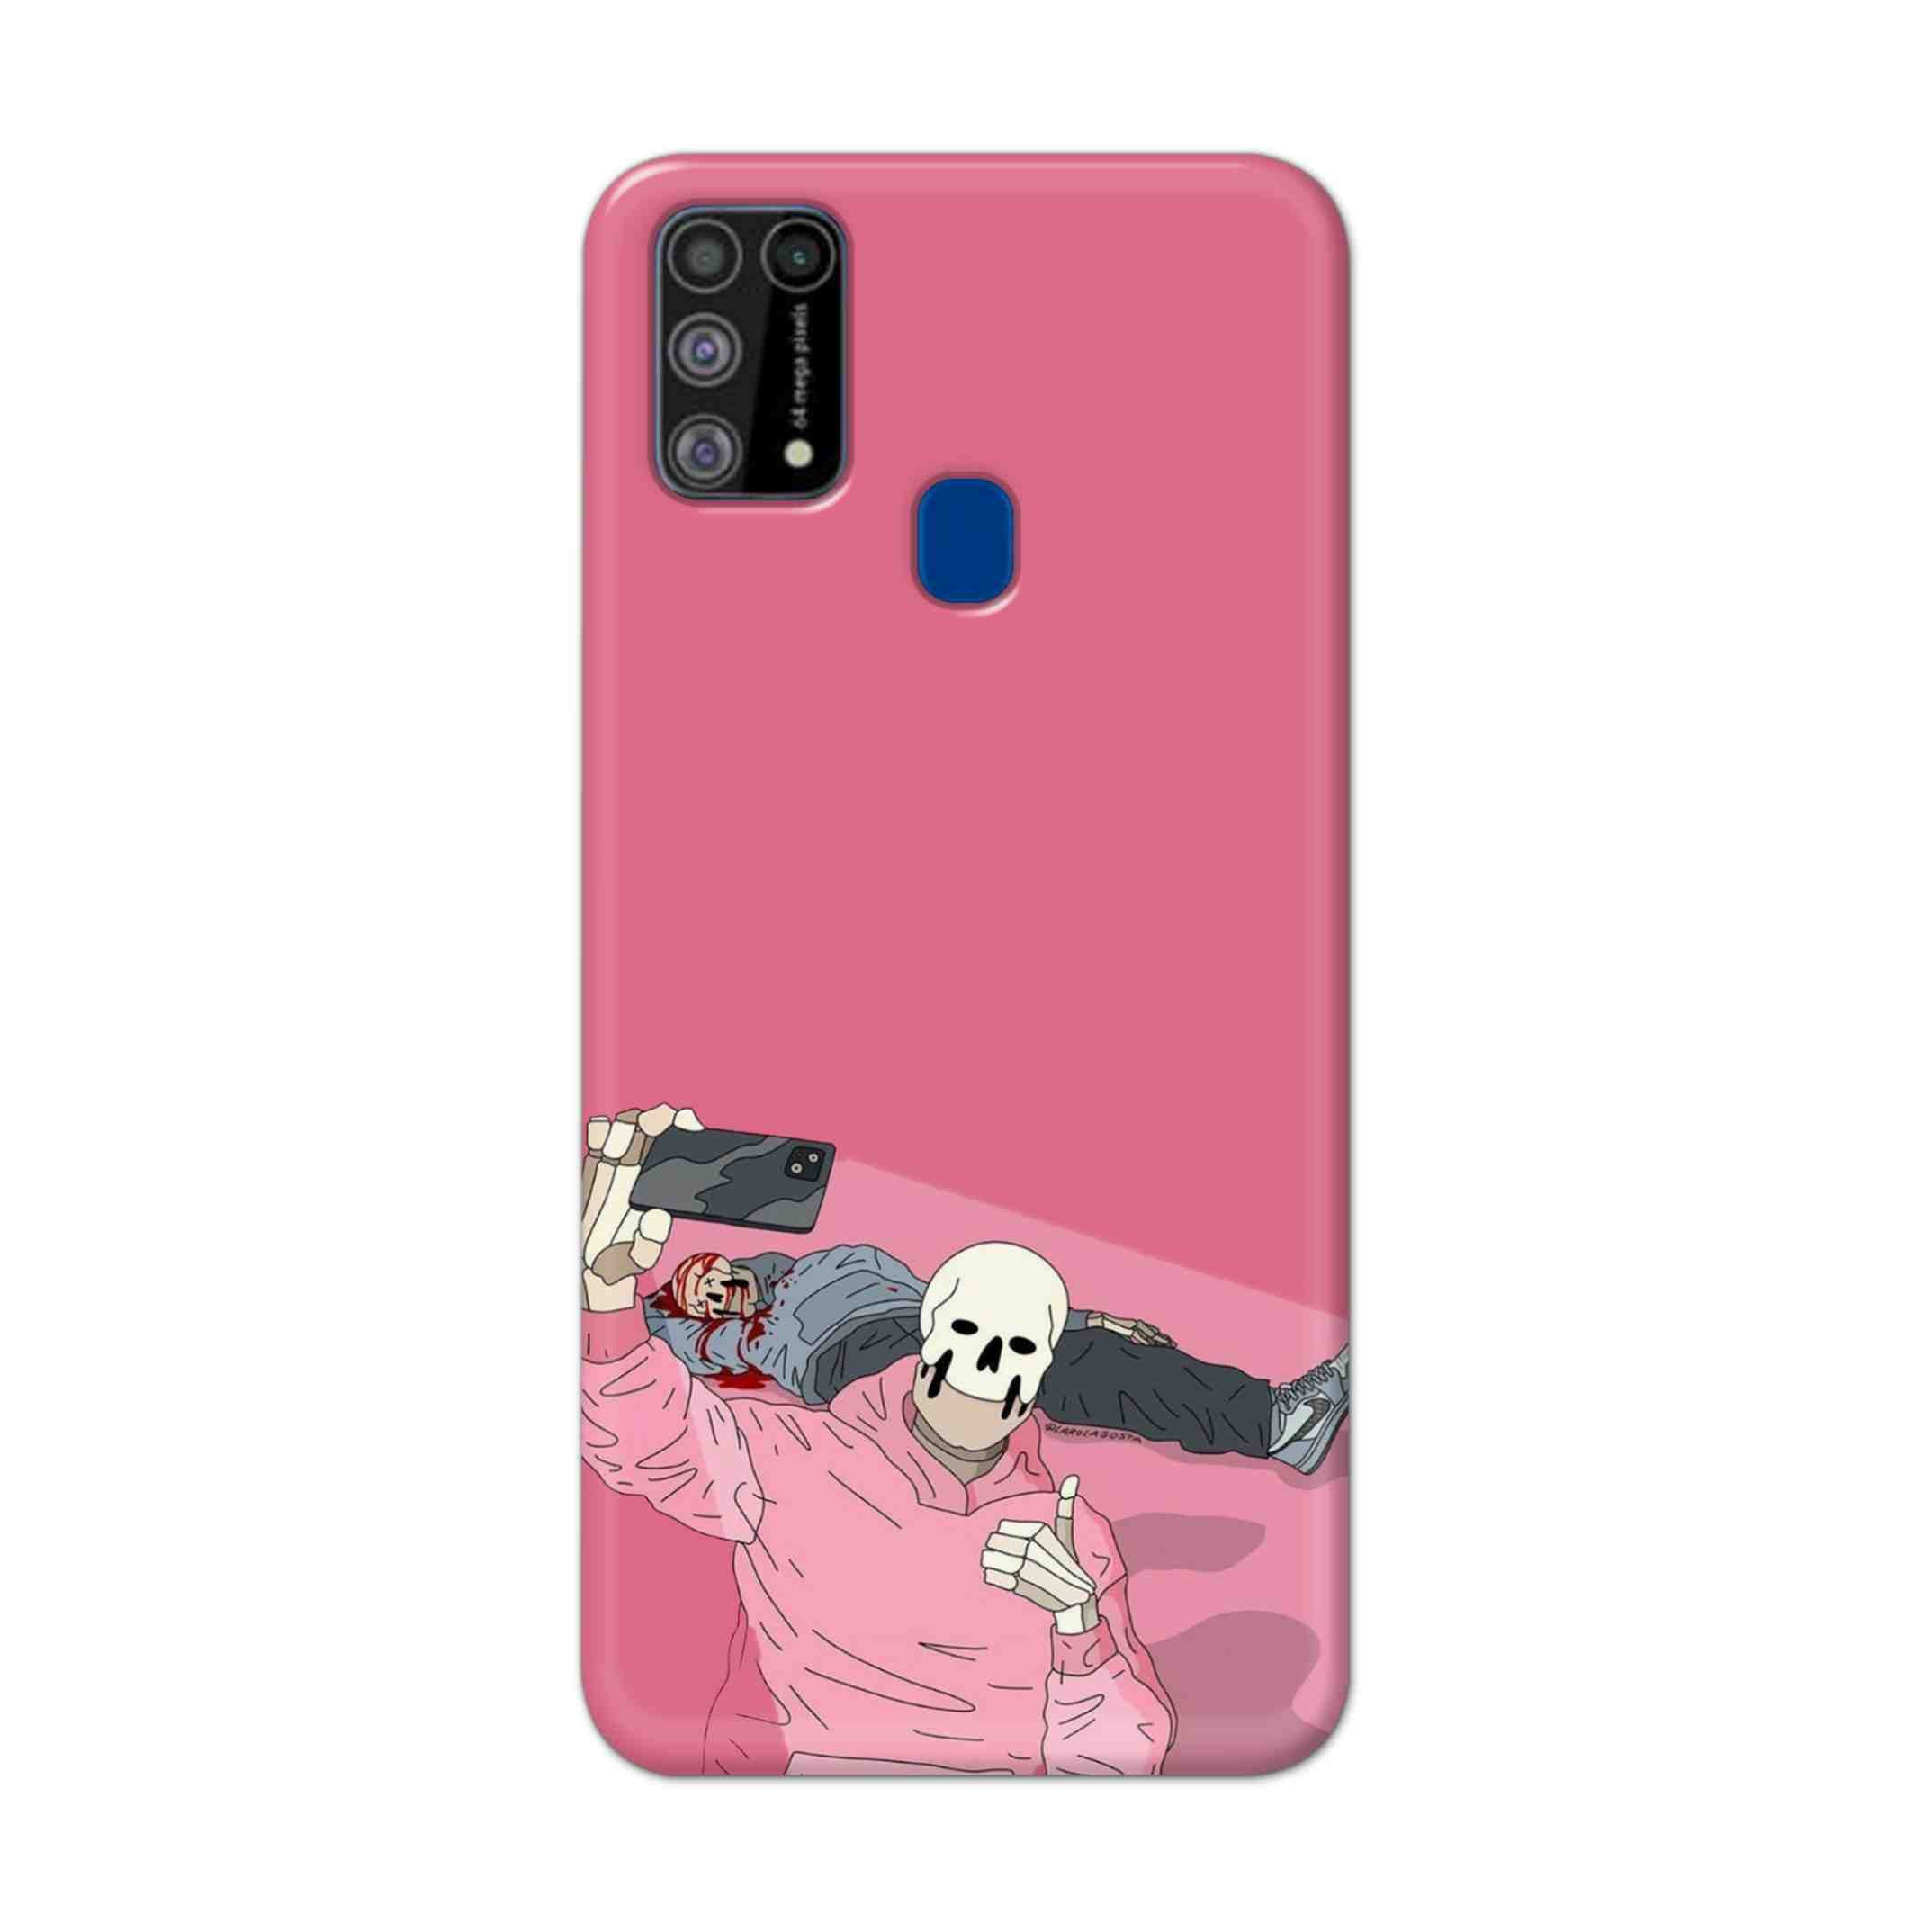 Buy Selfie Hard Back Mobile Phone Case Cover For Samsung Galaxy M31 Online